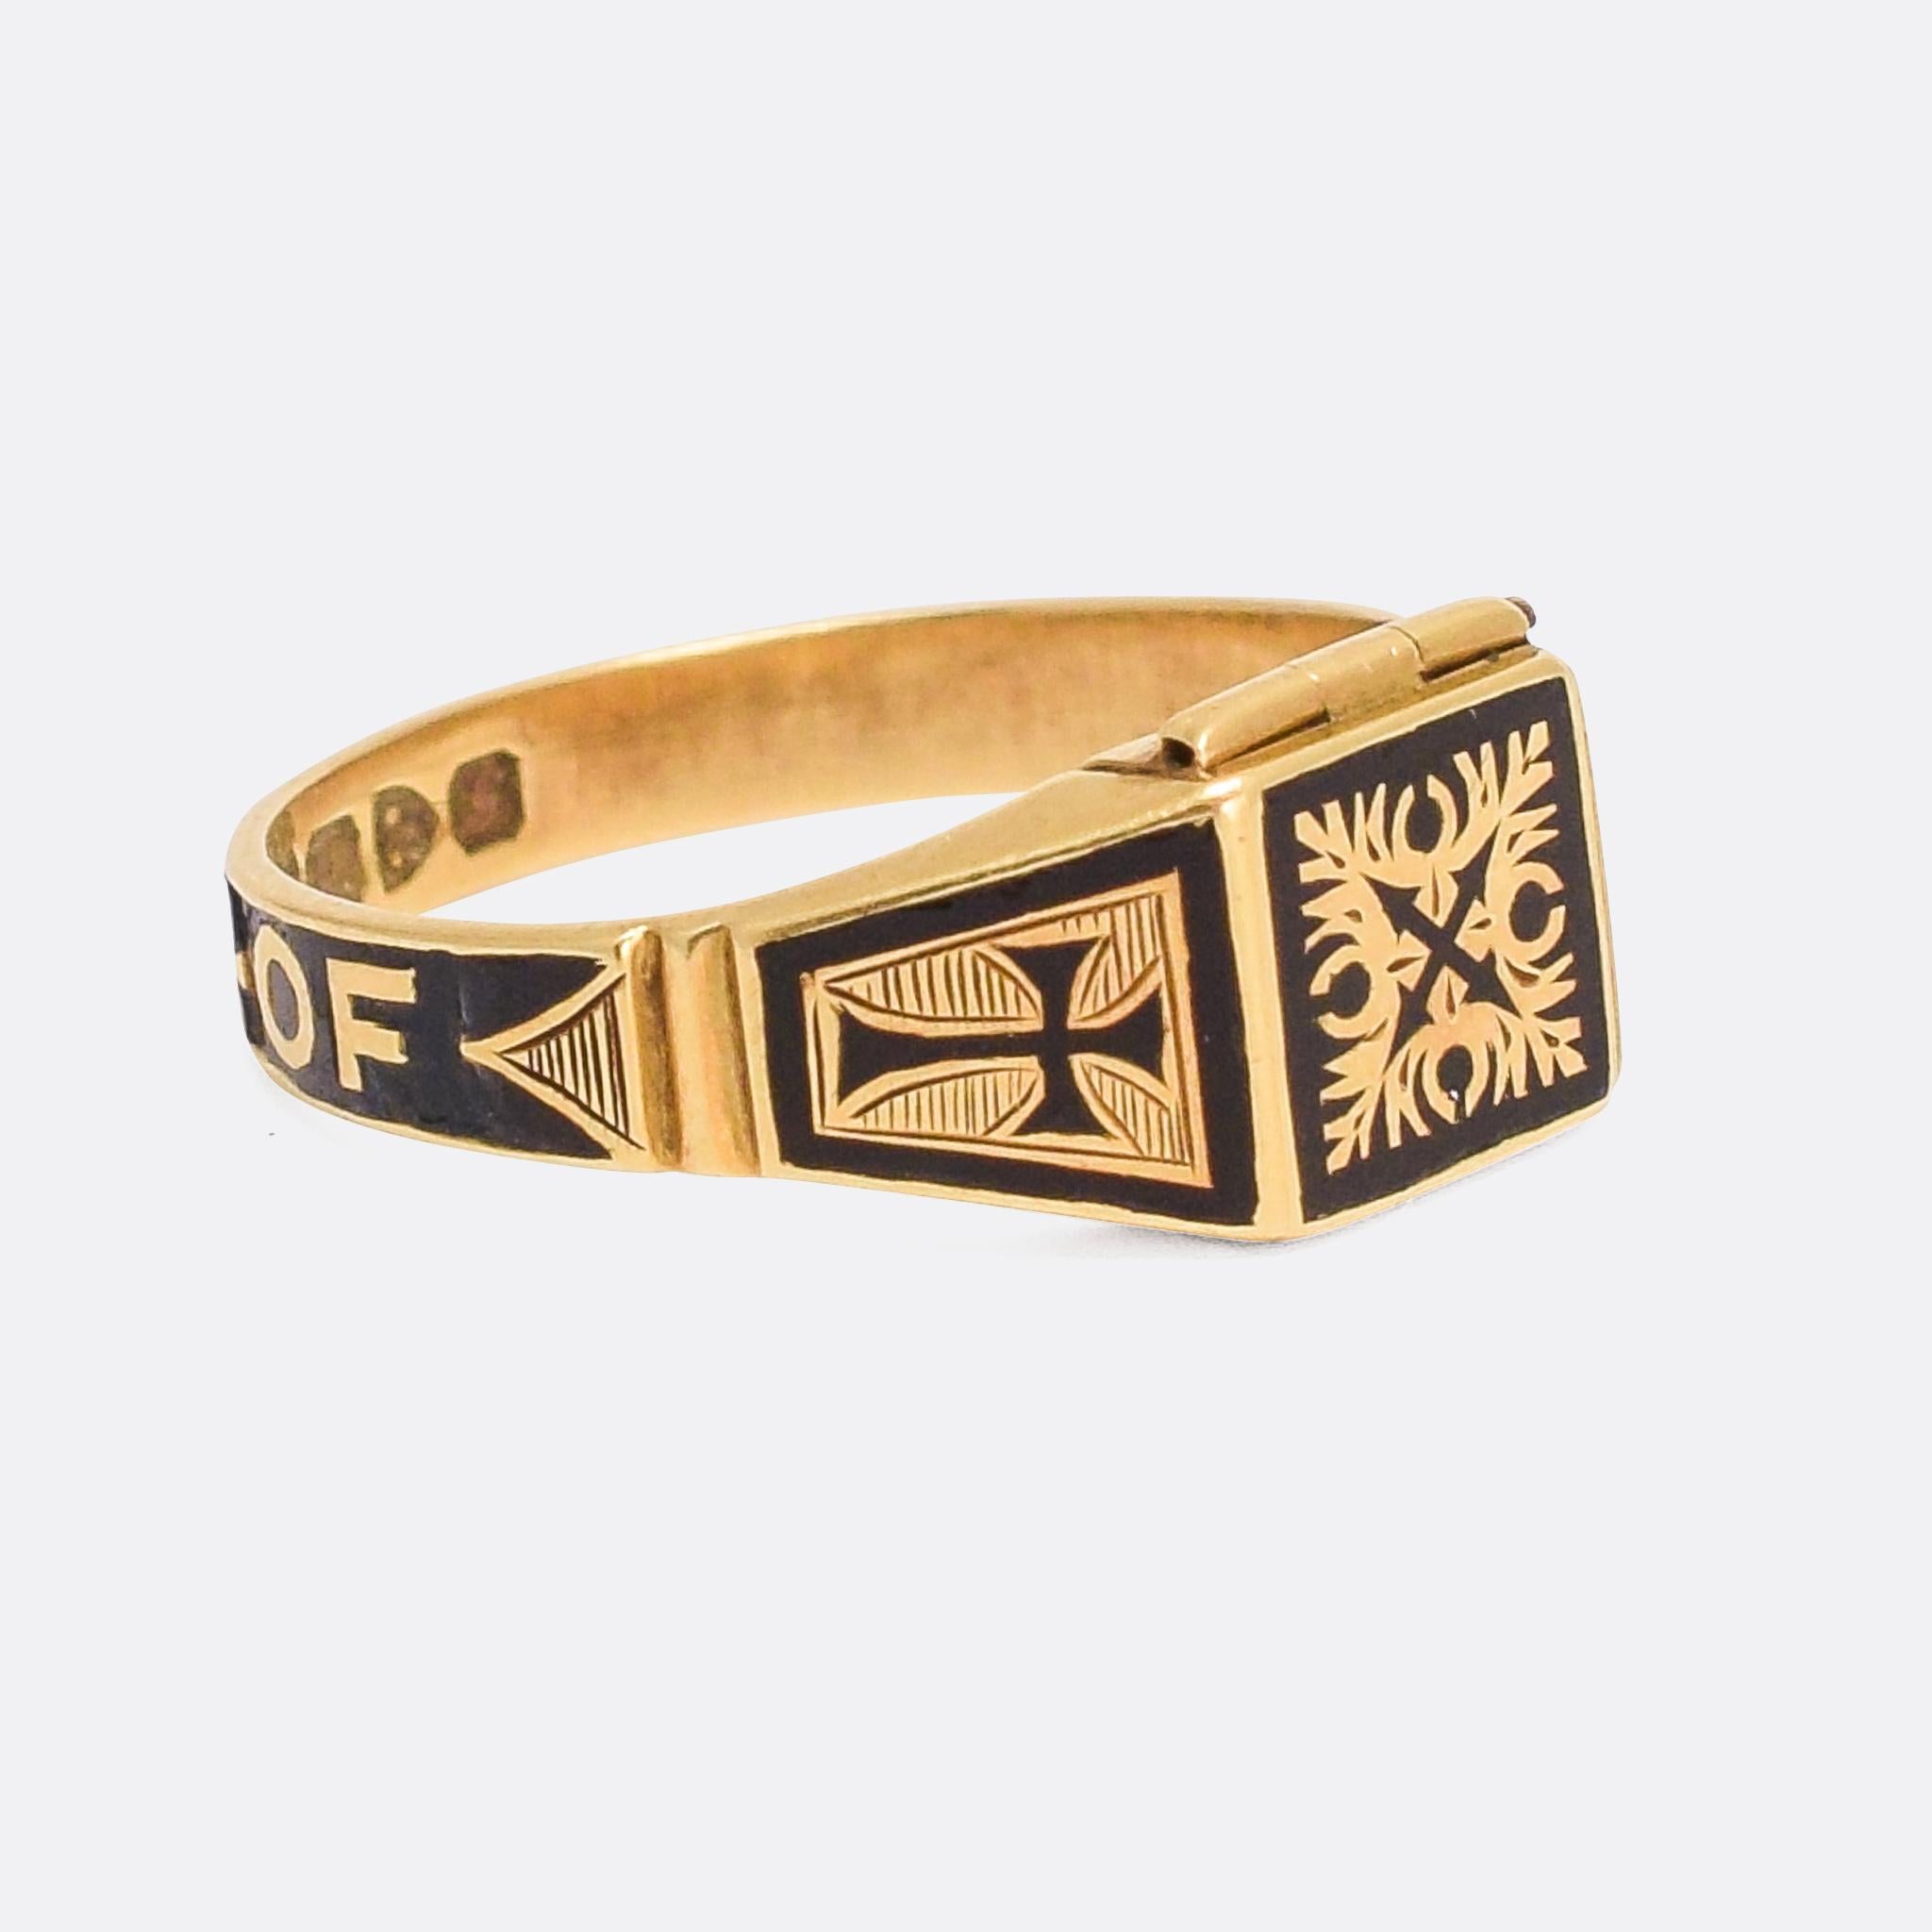 A superb antique memorial ring dating from the late 19th Century. It’s finished in intricate black enamel work, including cross motifs and the words In Memory Of around the back of the band. The face is hinged, opening to reveal a square locket